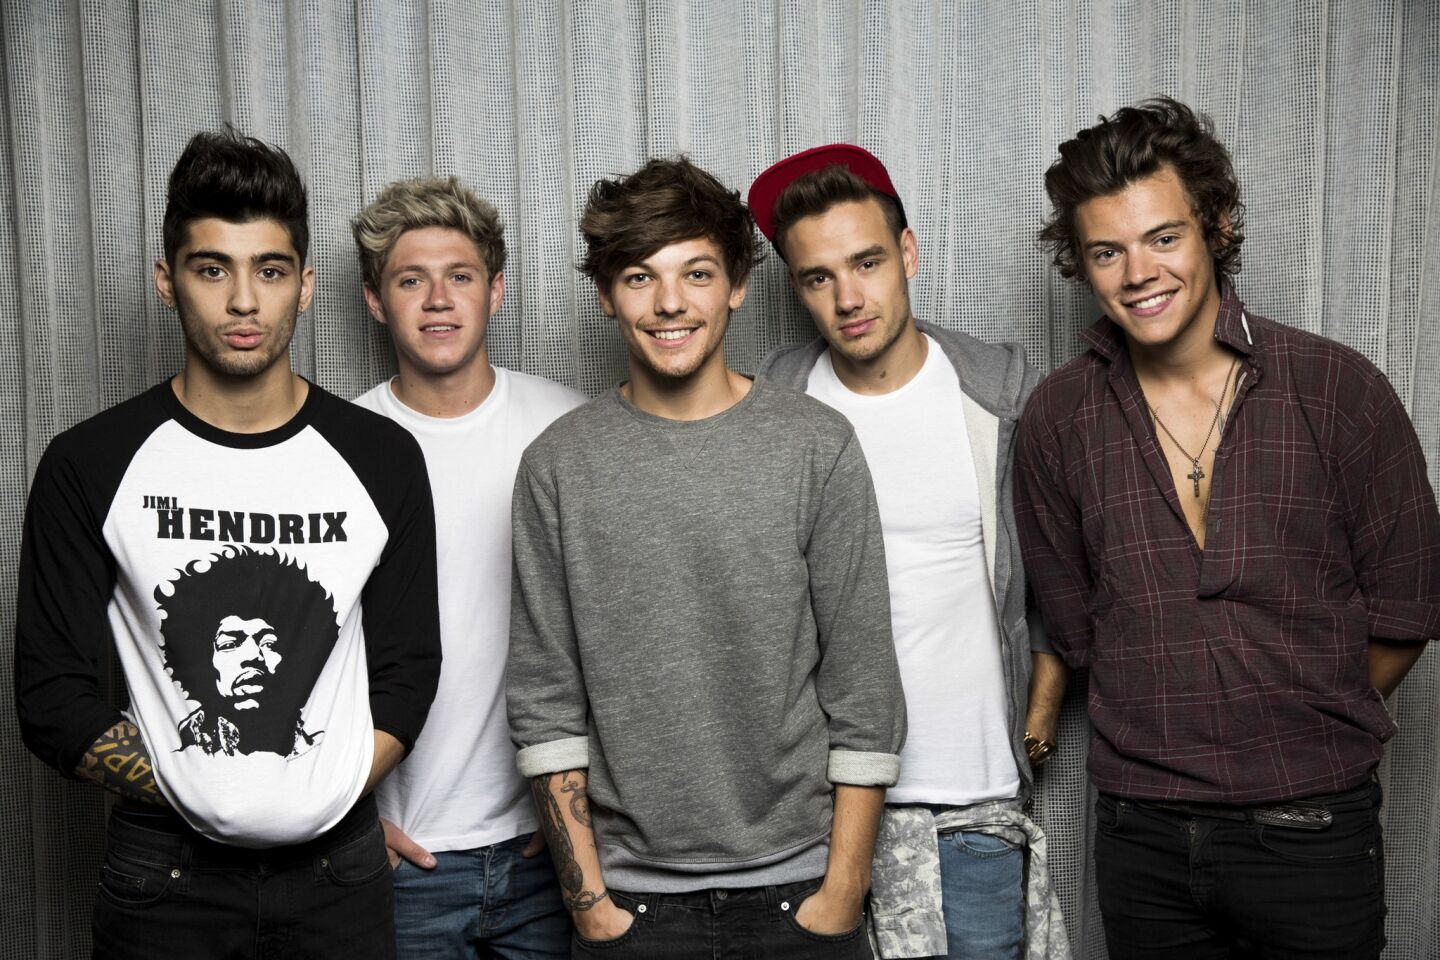 One Direction is coming to the Rose Bowl on Sept. 11